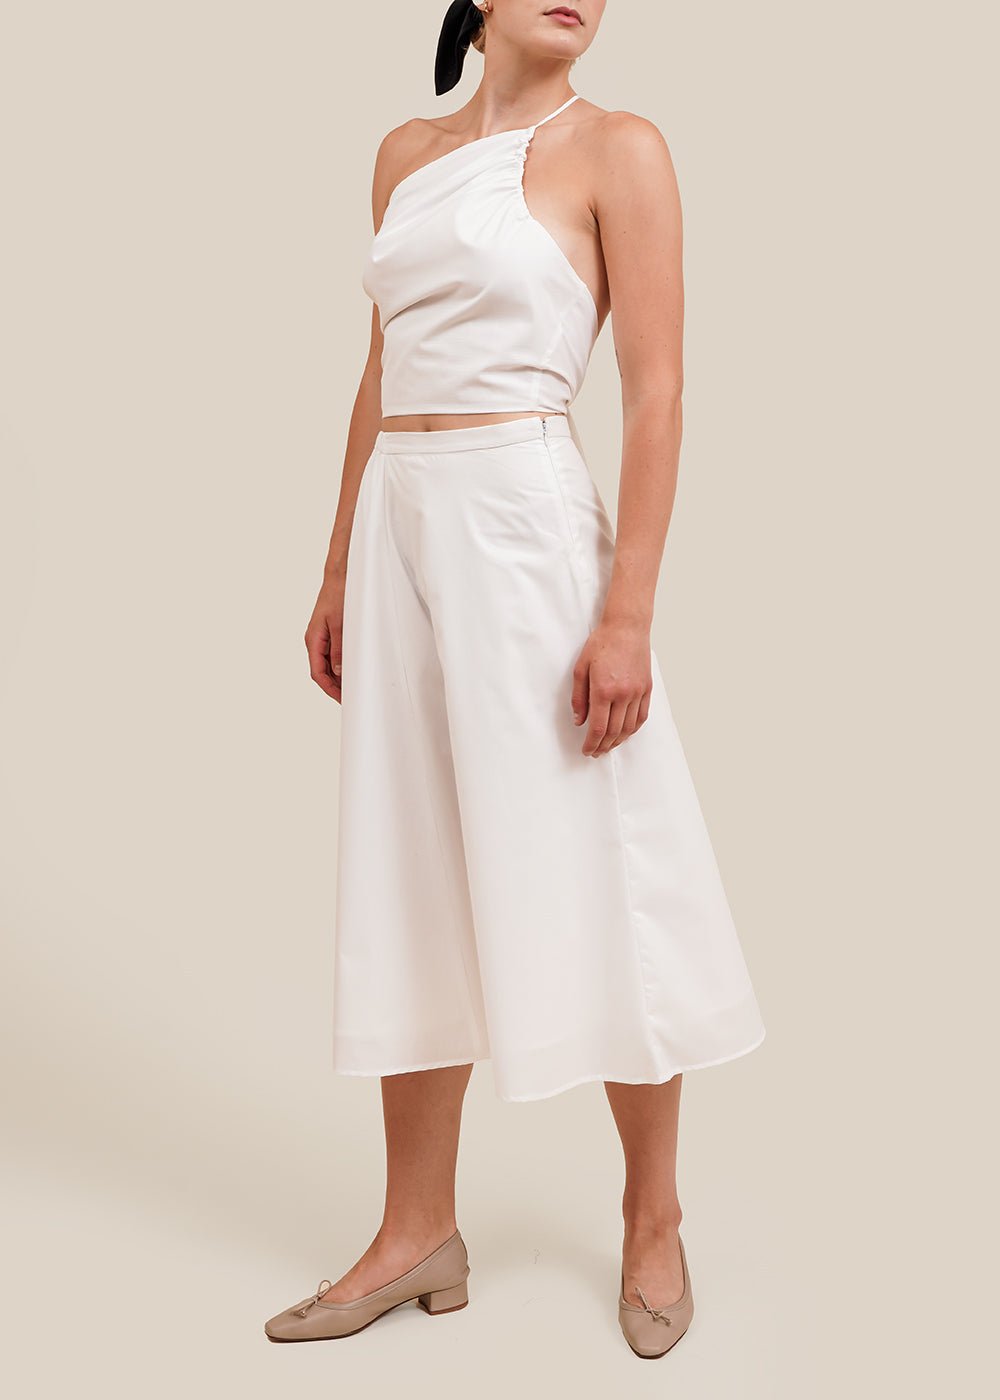 Angie Bauer White Corsica Top - New Classics Studios Sustainable Ethical Fashion Canada